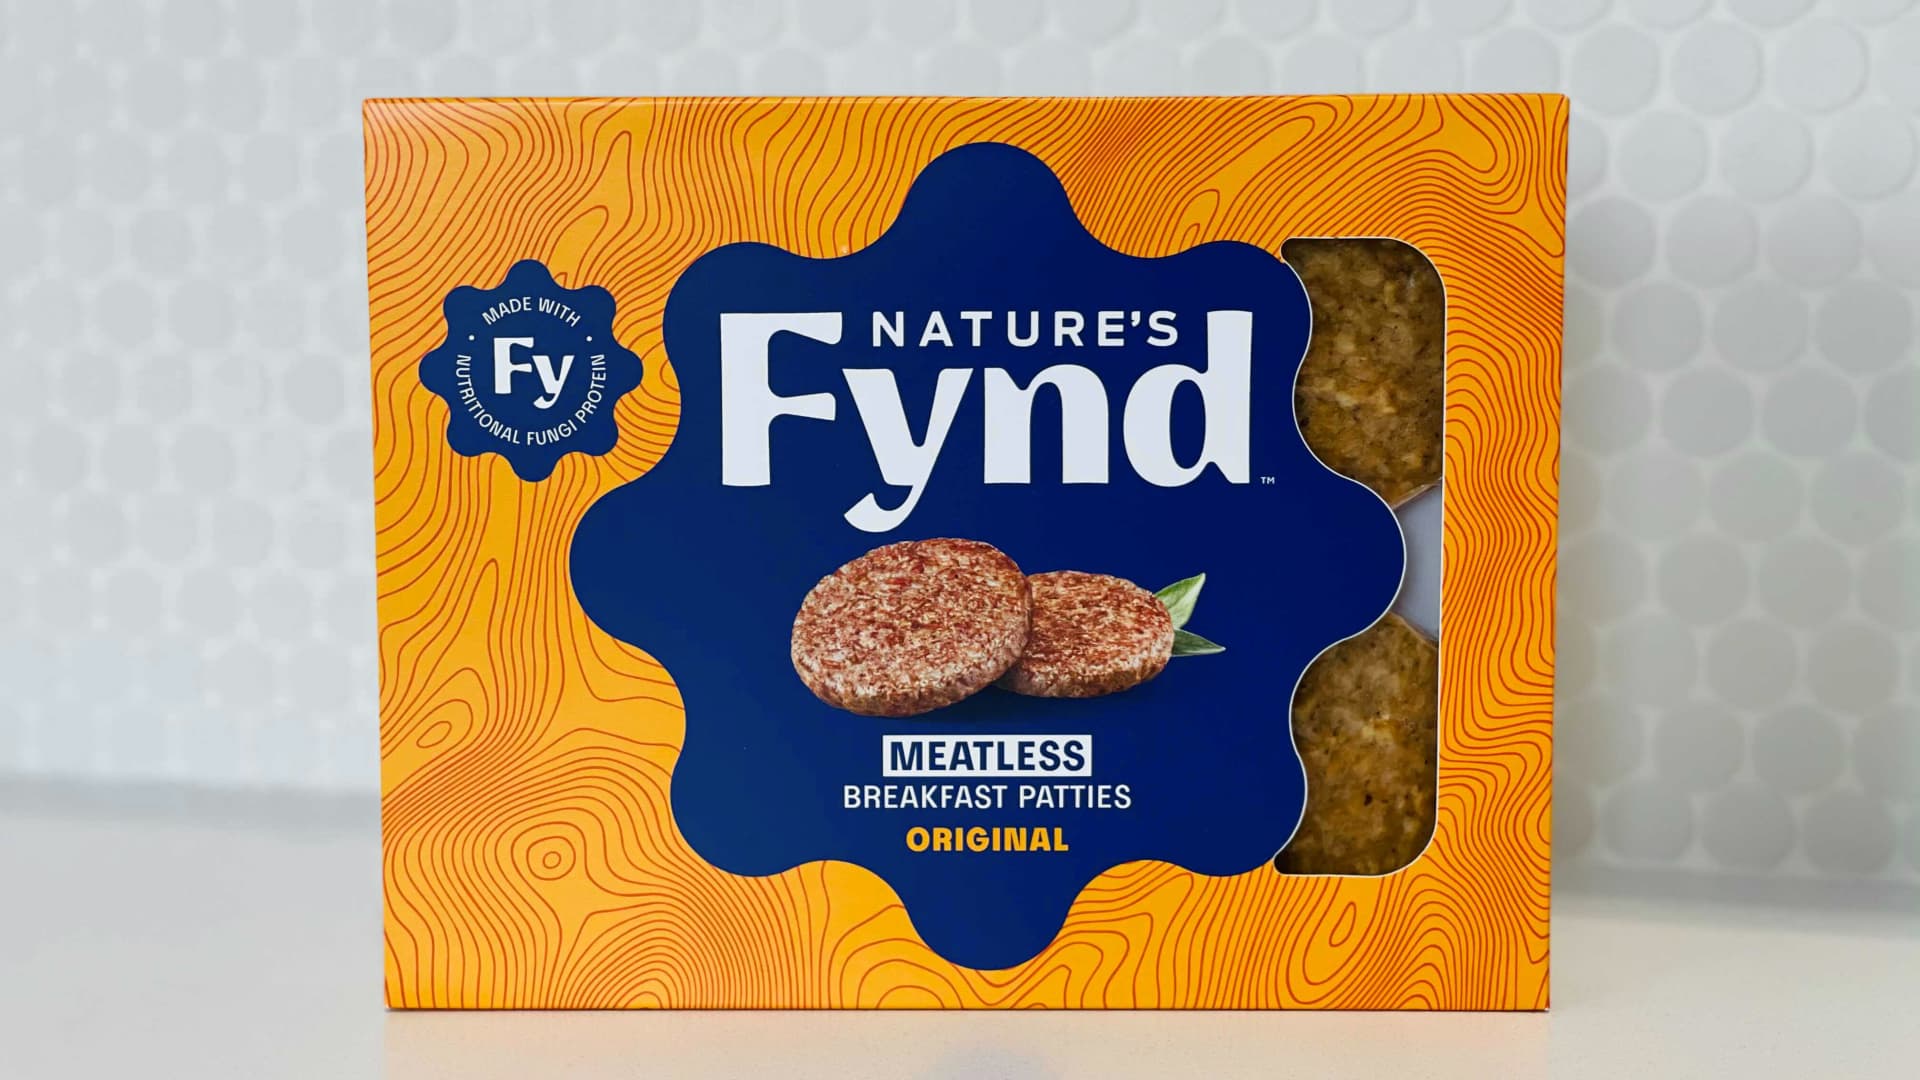 With $158 million in funding from Jeff Bezos, Bill Gates, Al Gore and other investors, Nature's Fynd meatless breakfast patties and hamburgers, dairy-free cream cheese and yogurt, and nuggets, minus chicken, are scheduled to hit grocers' shelves later this year.